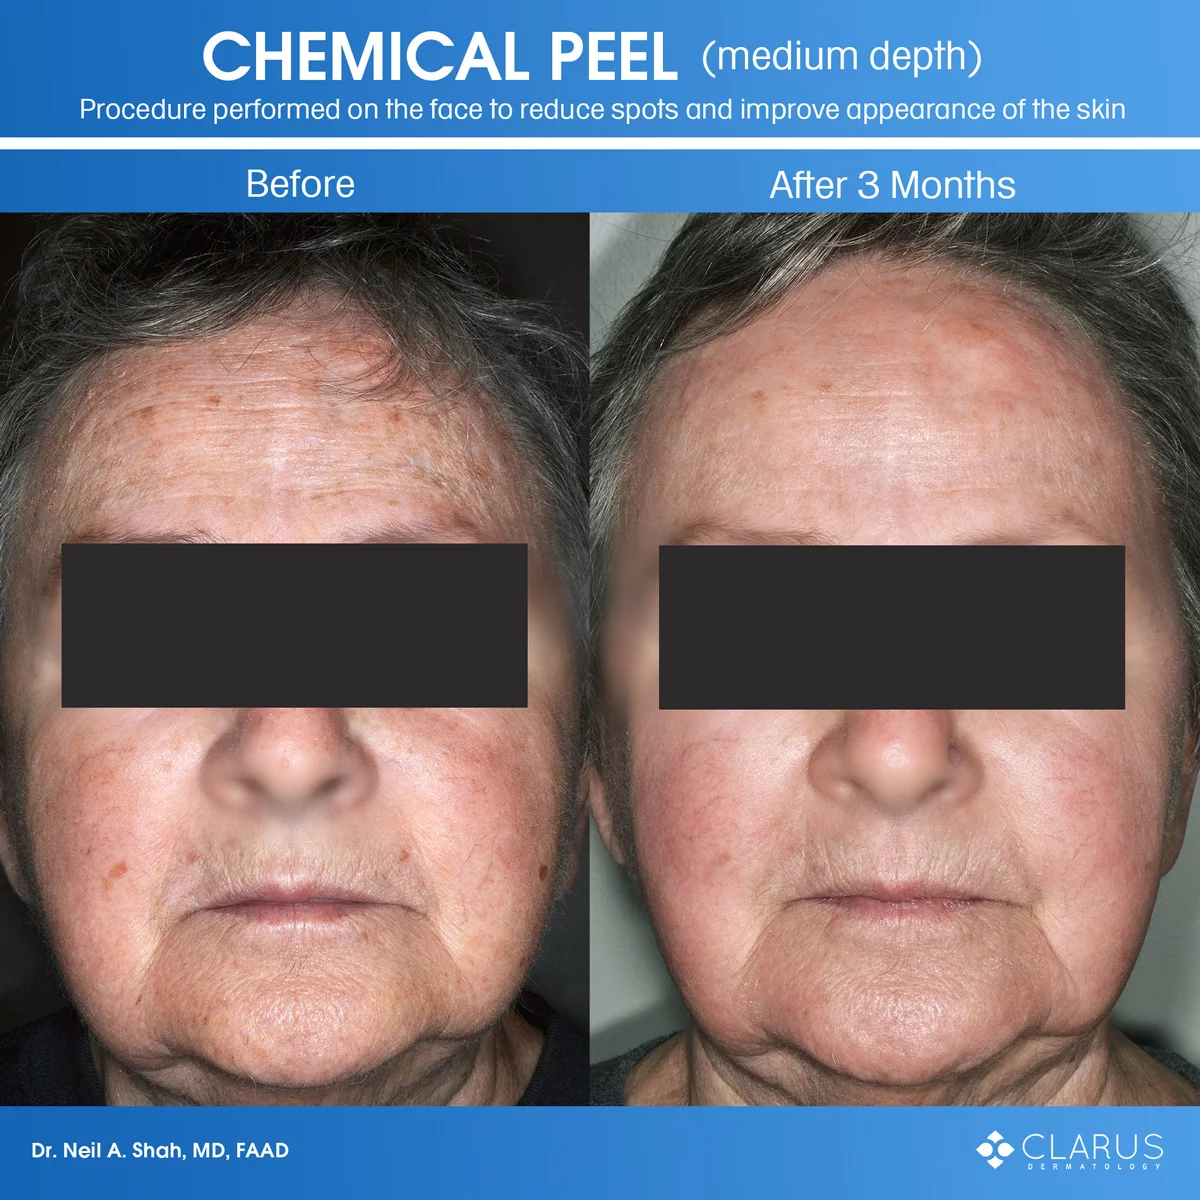 We perform a number of cosmetic treatments at Clarus Dermatology and among them, chemical peels are time-tested, high-value, and popular for dealing with acne, sun-damage, and precancerous skin growths.